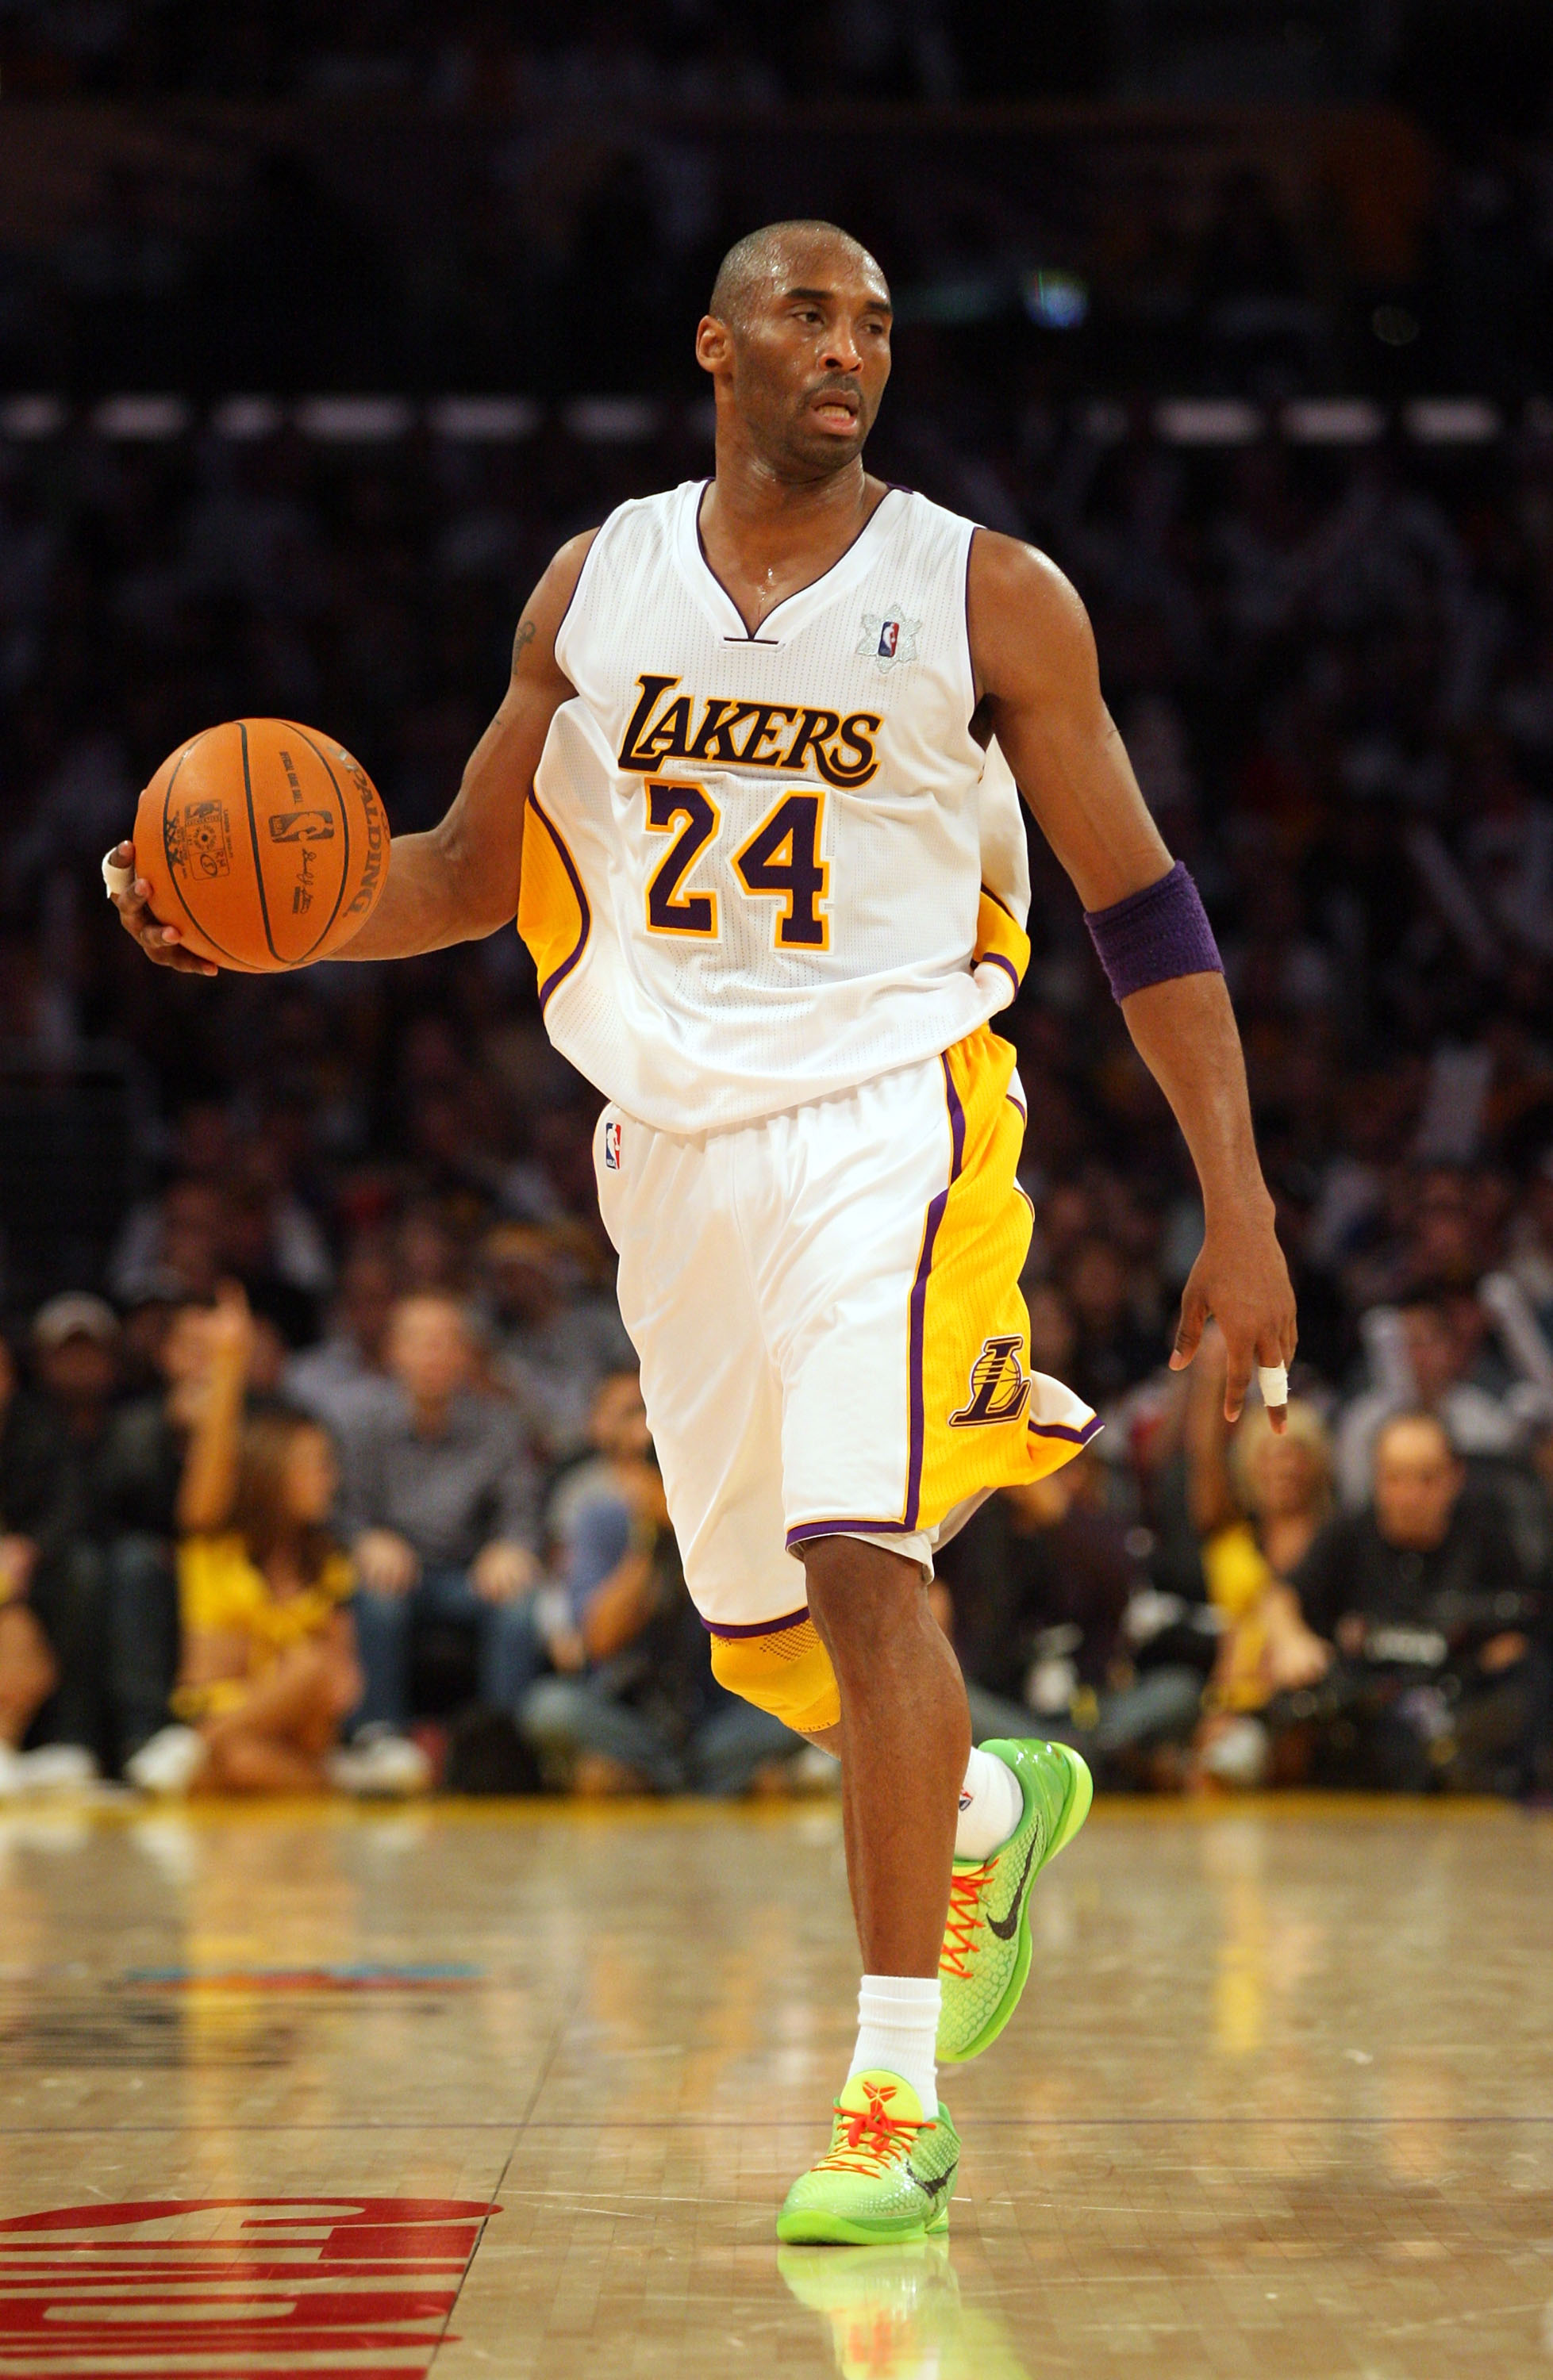 LOS ANGELES, CA - DECEMBER 25:  Kobe Bryant #24 of the Los Angeles Lakers dribbles the ball against the Miami Heat during the NBA game at Staples Center on December 25, 2010 in Los Angeles, California. NOTE TO USER: User expressly acknowledges and agrees